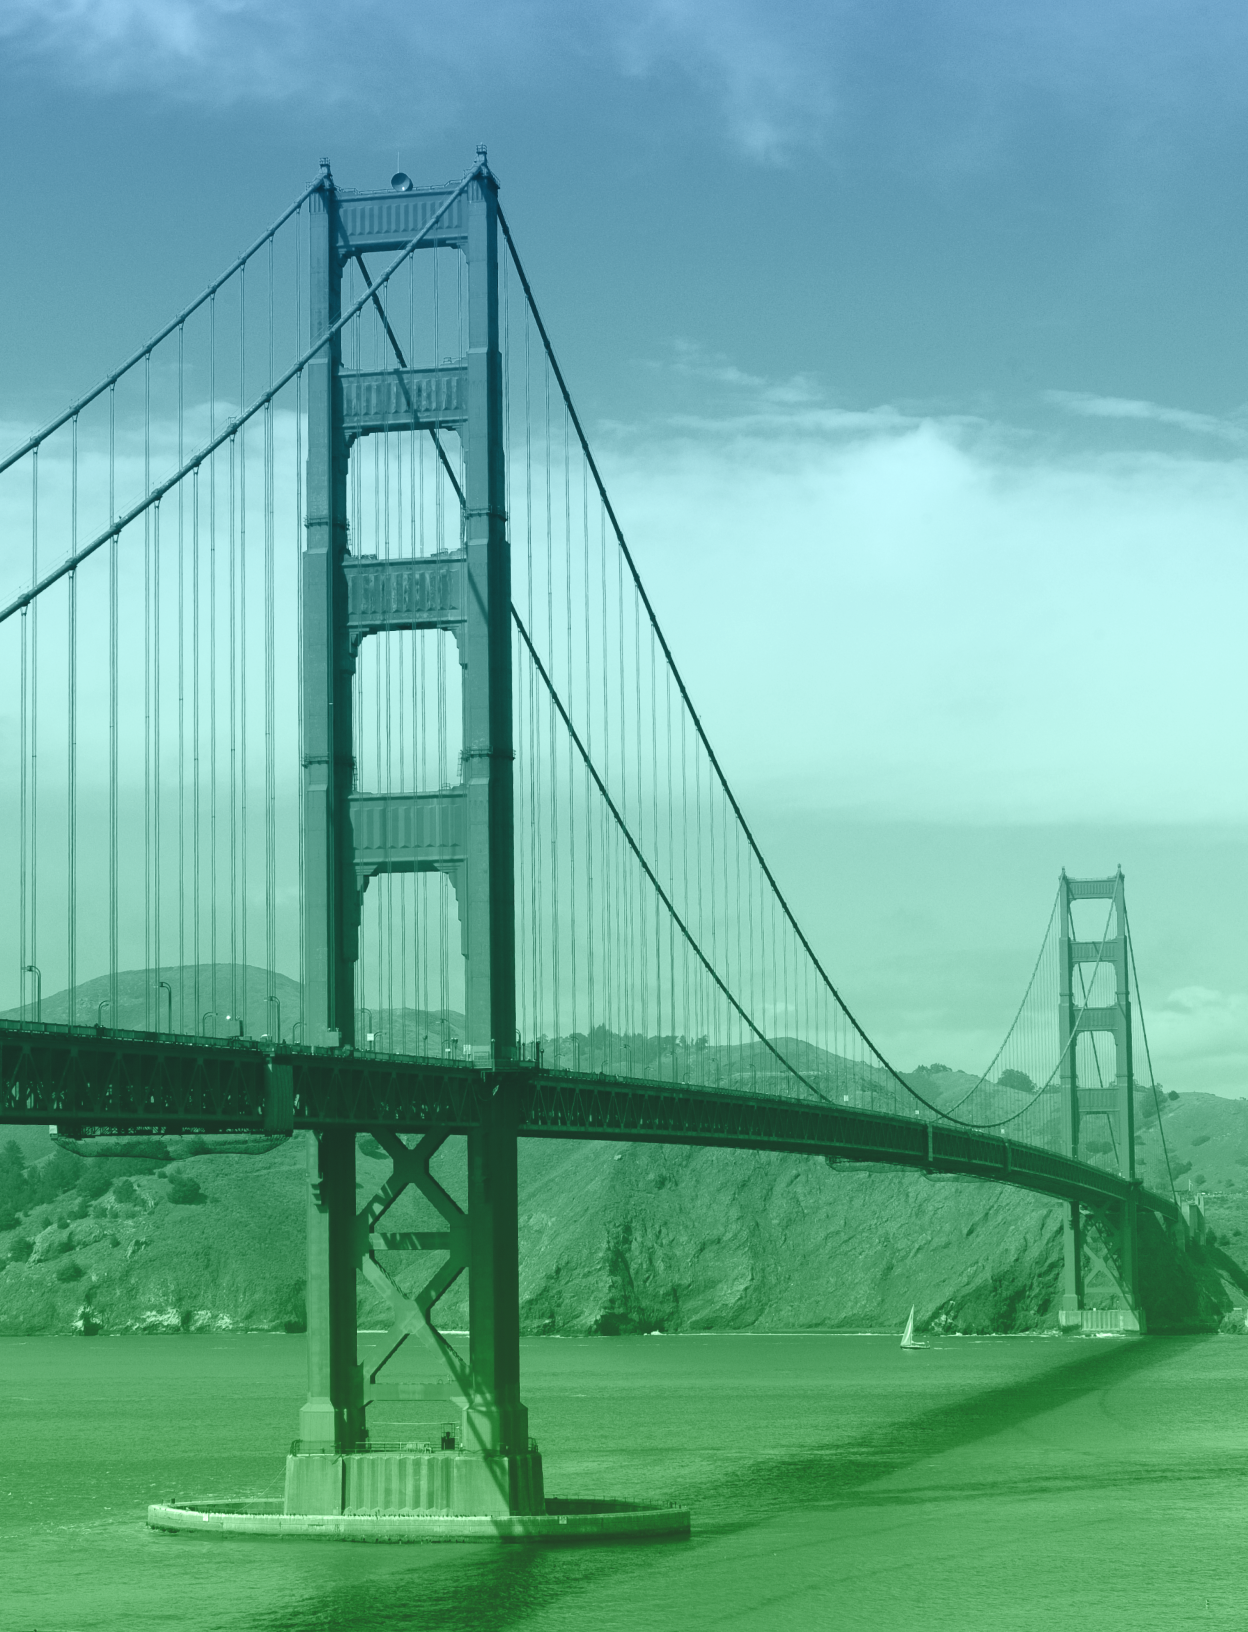 Portrait photo of the Golden Gate Bridge in San Francisco with a blue-green gradient overlay